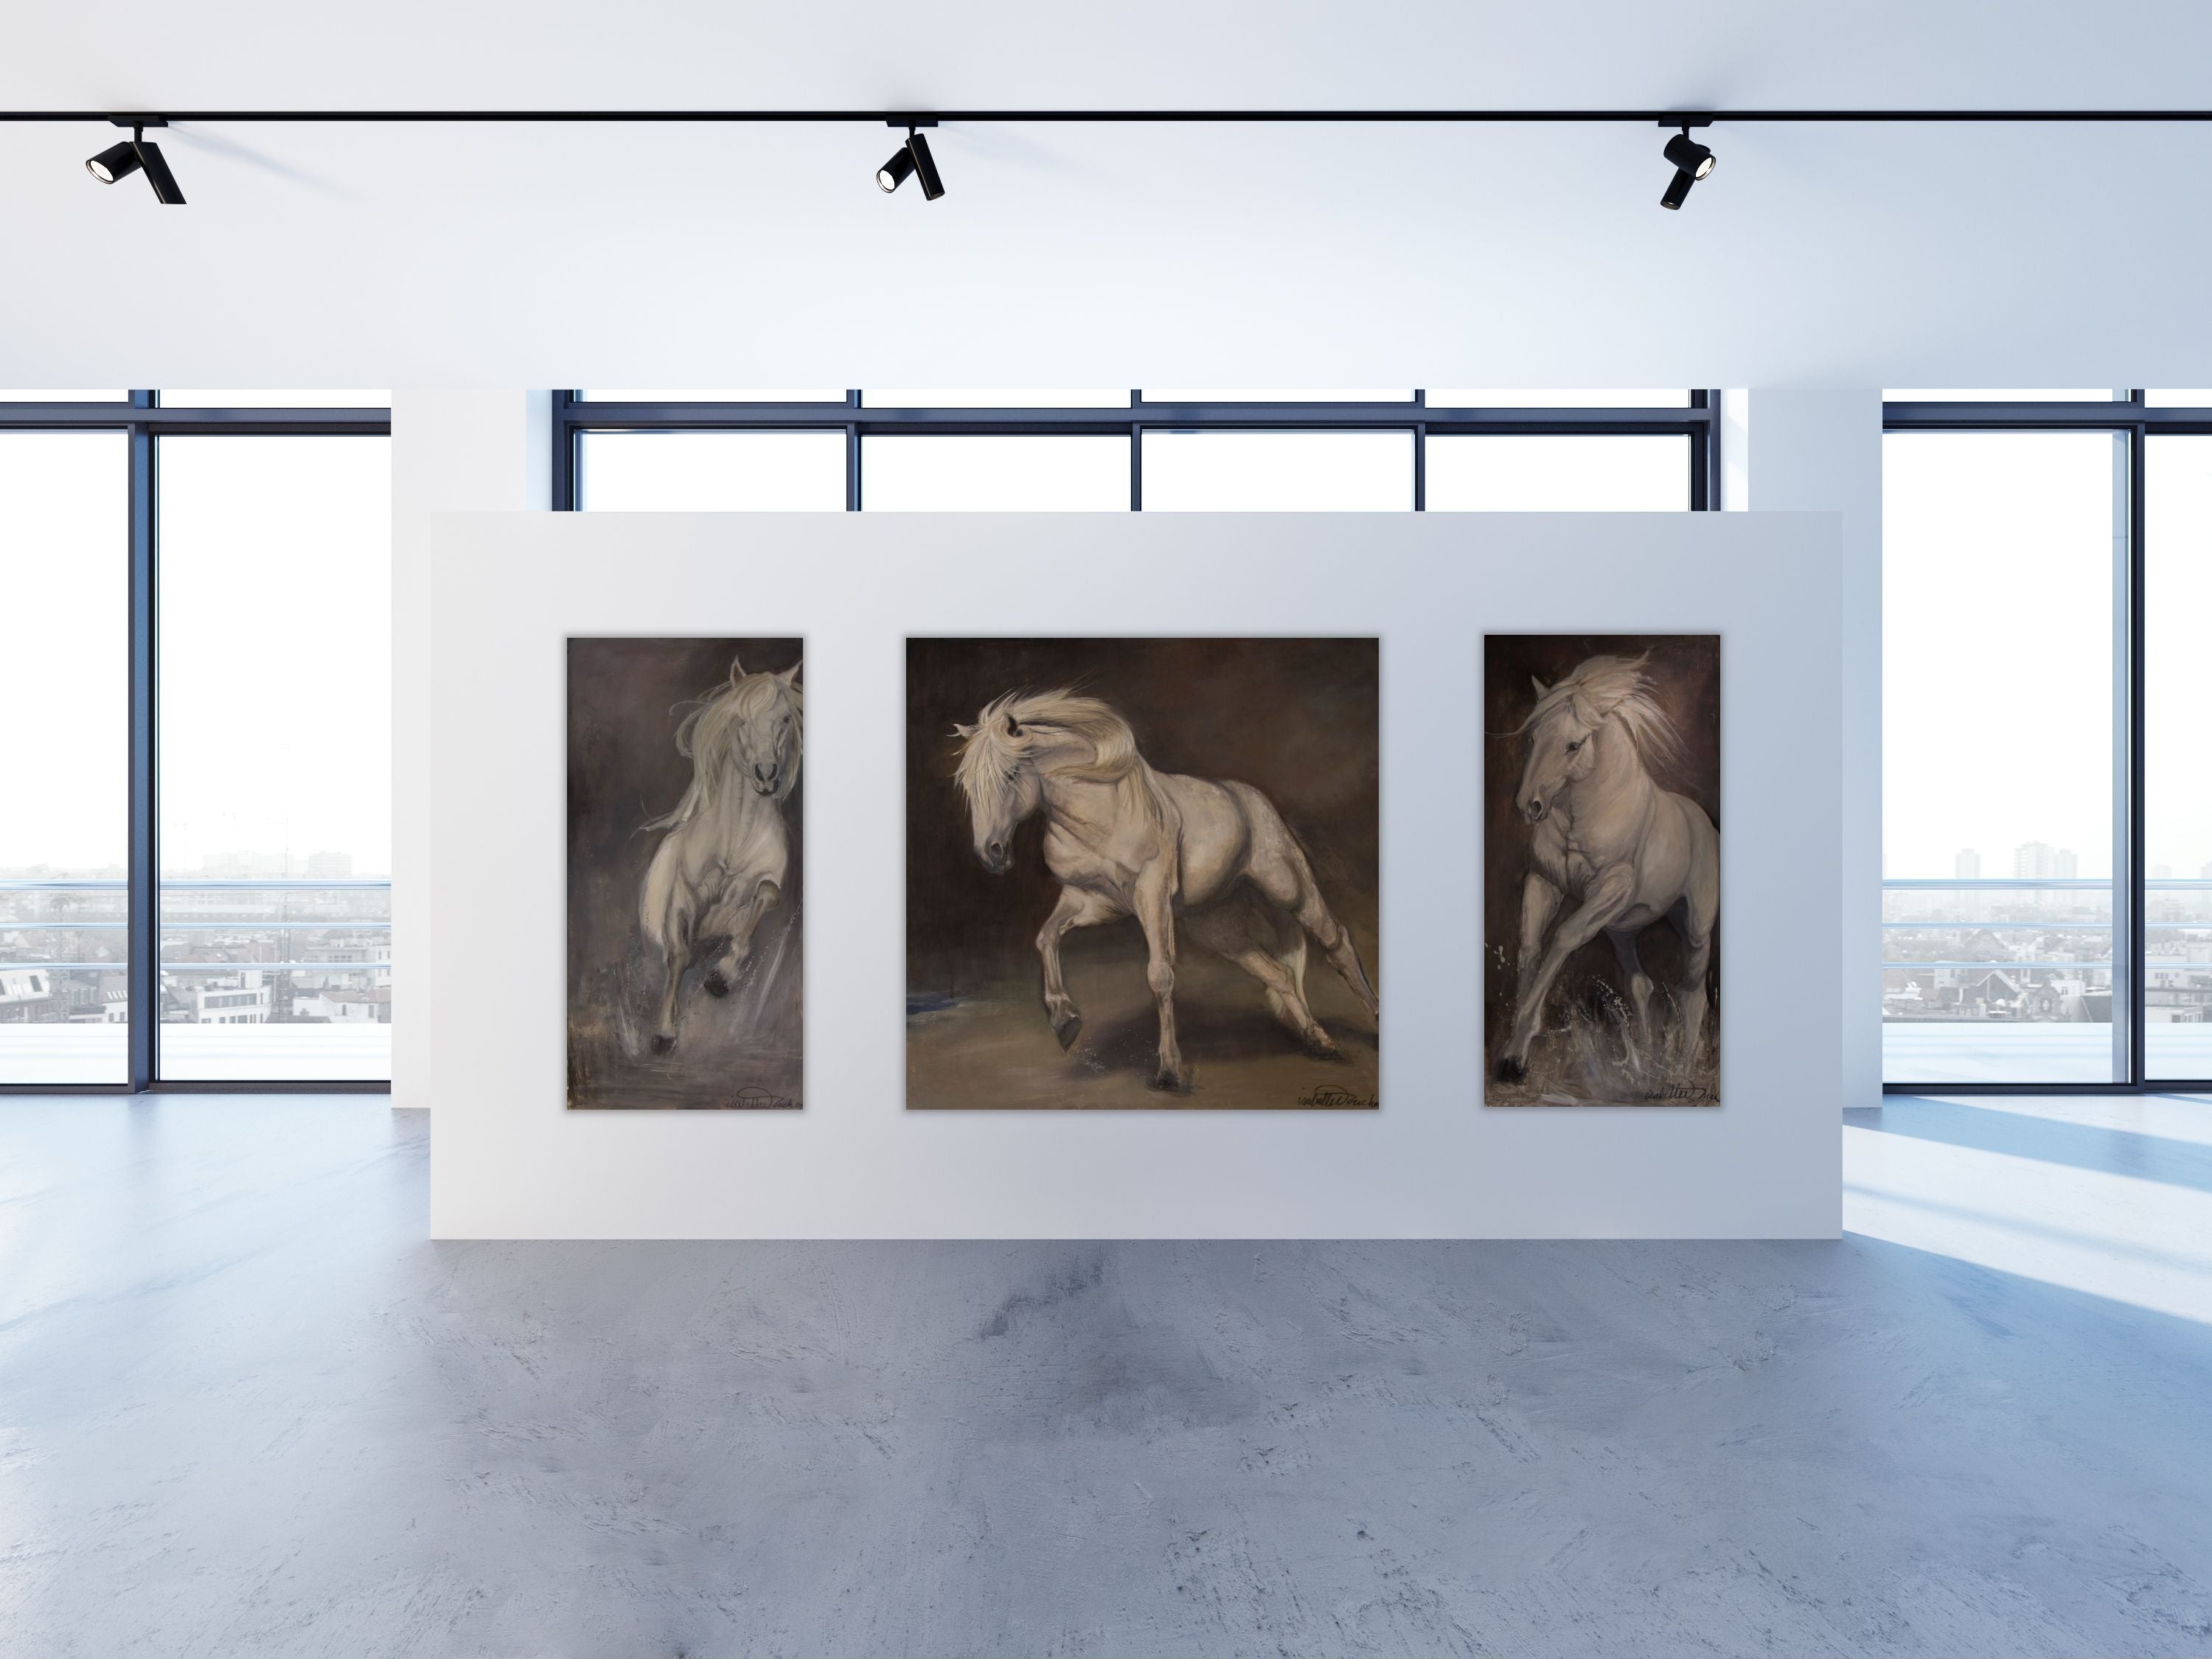 Inspired by the beautiful horse of the Camargue, this original oil painting showcases the might of the Camargais breed, one of the oldest breeds on the planet today. Resilient, stoic, and gentle. Here shown with Leap, and Spring Through, accompaniments to the Humble Warrior/Wild•Free Flagship piece.